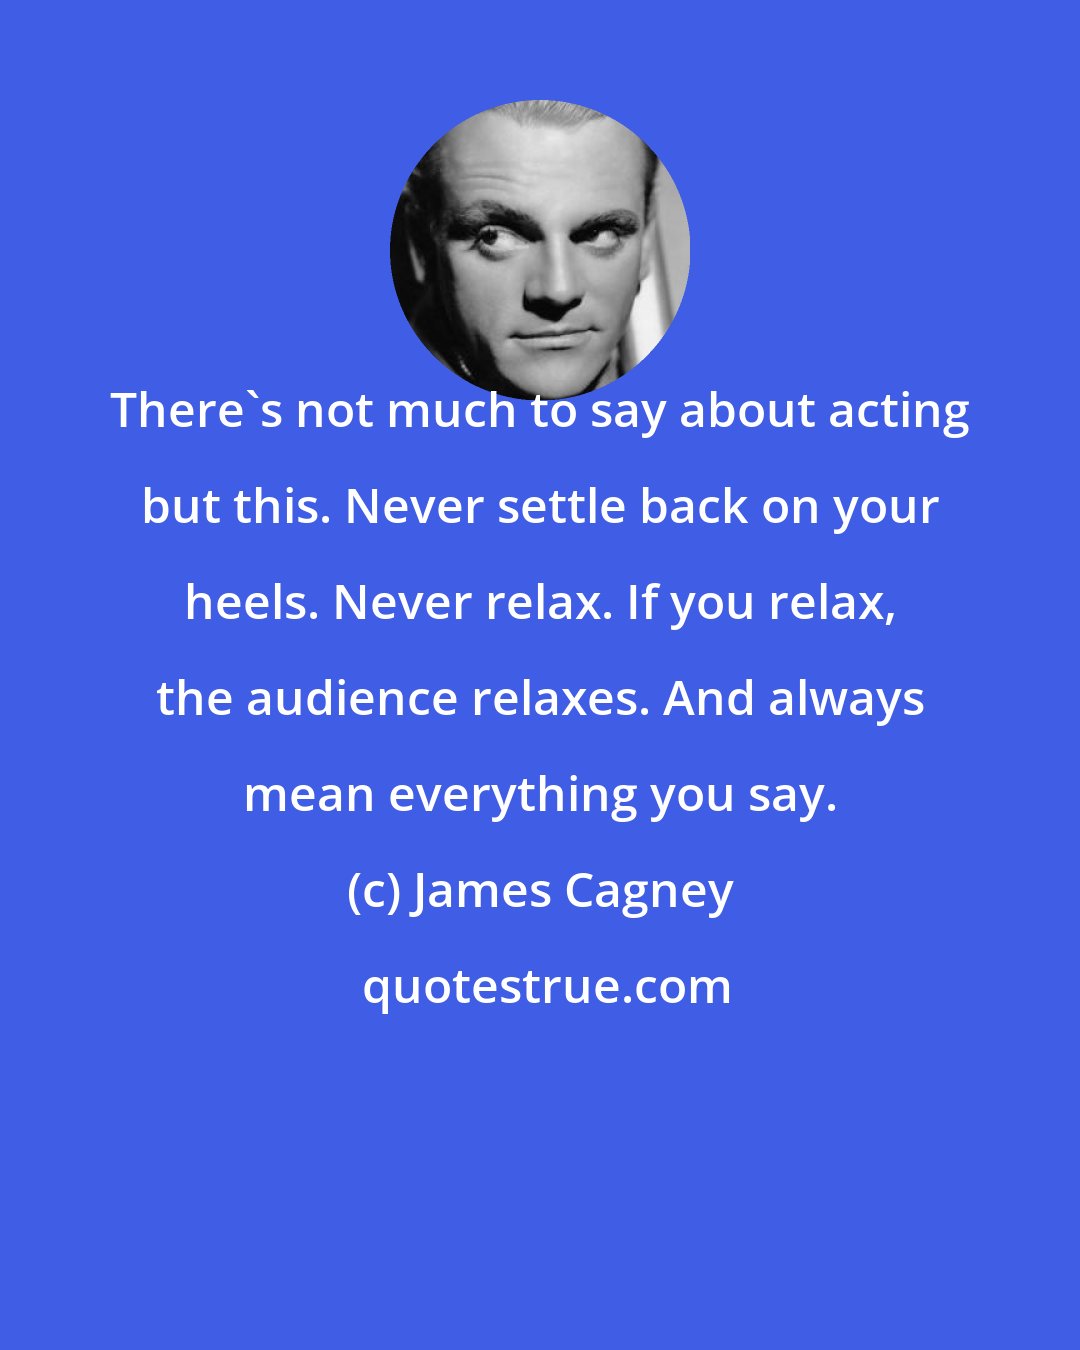 James Cagney: There's not much to say about acting but this. Never settle back on your heels. Never relax. If you relax, the audience relaxes. And always mean everything you say.